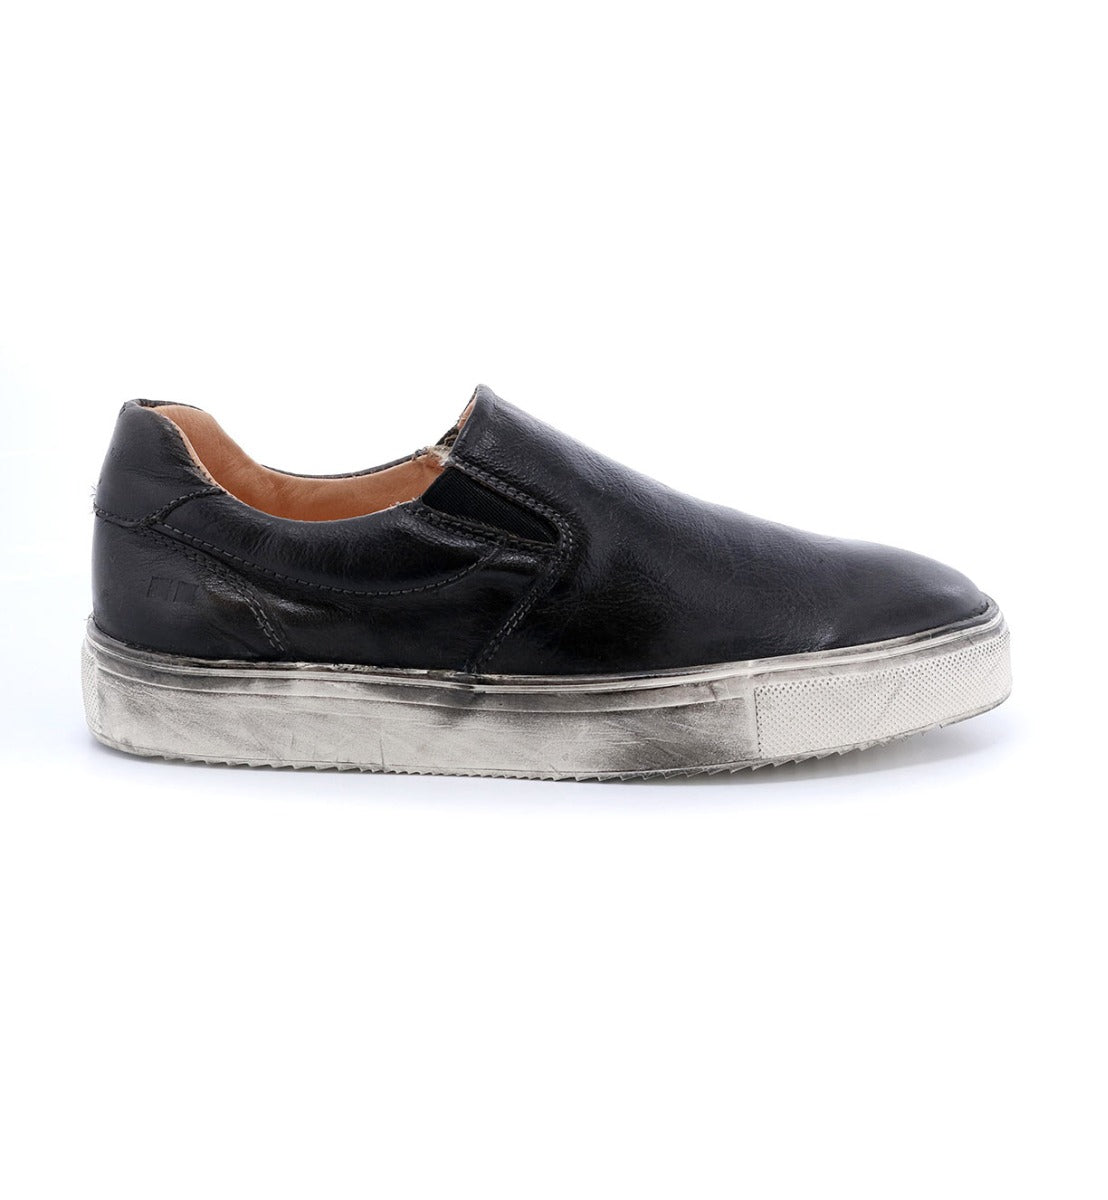 A black leather Hermione slip on sneaker with silver soles by Bed Stu.